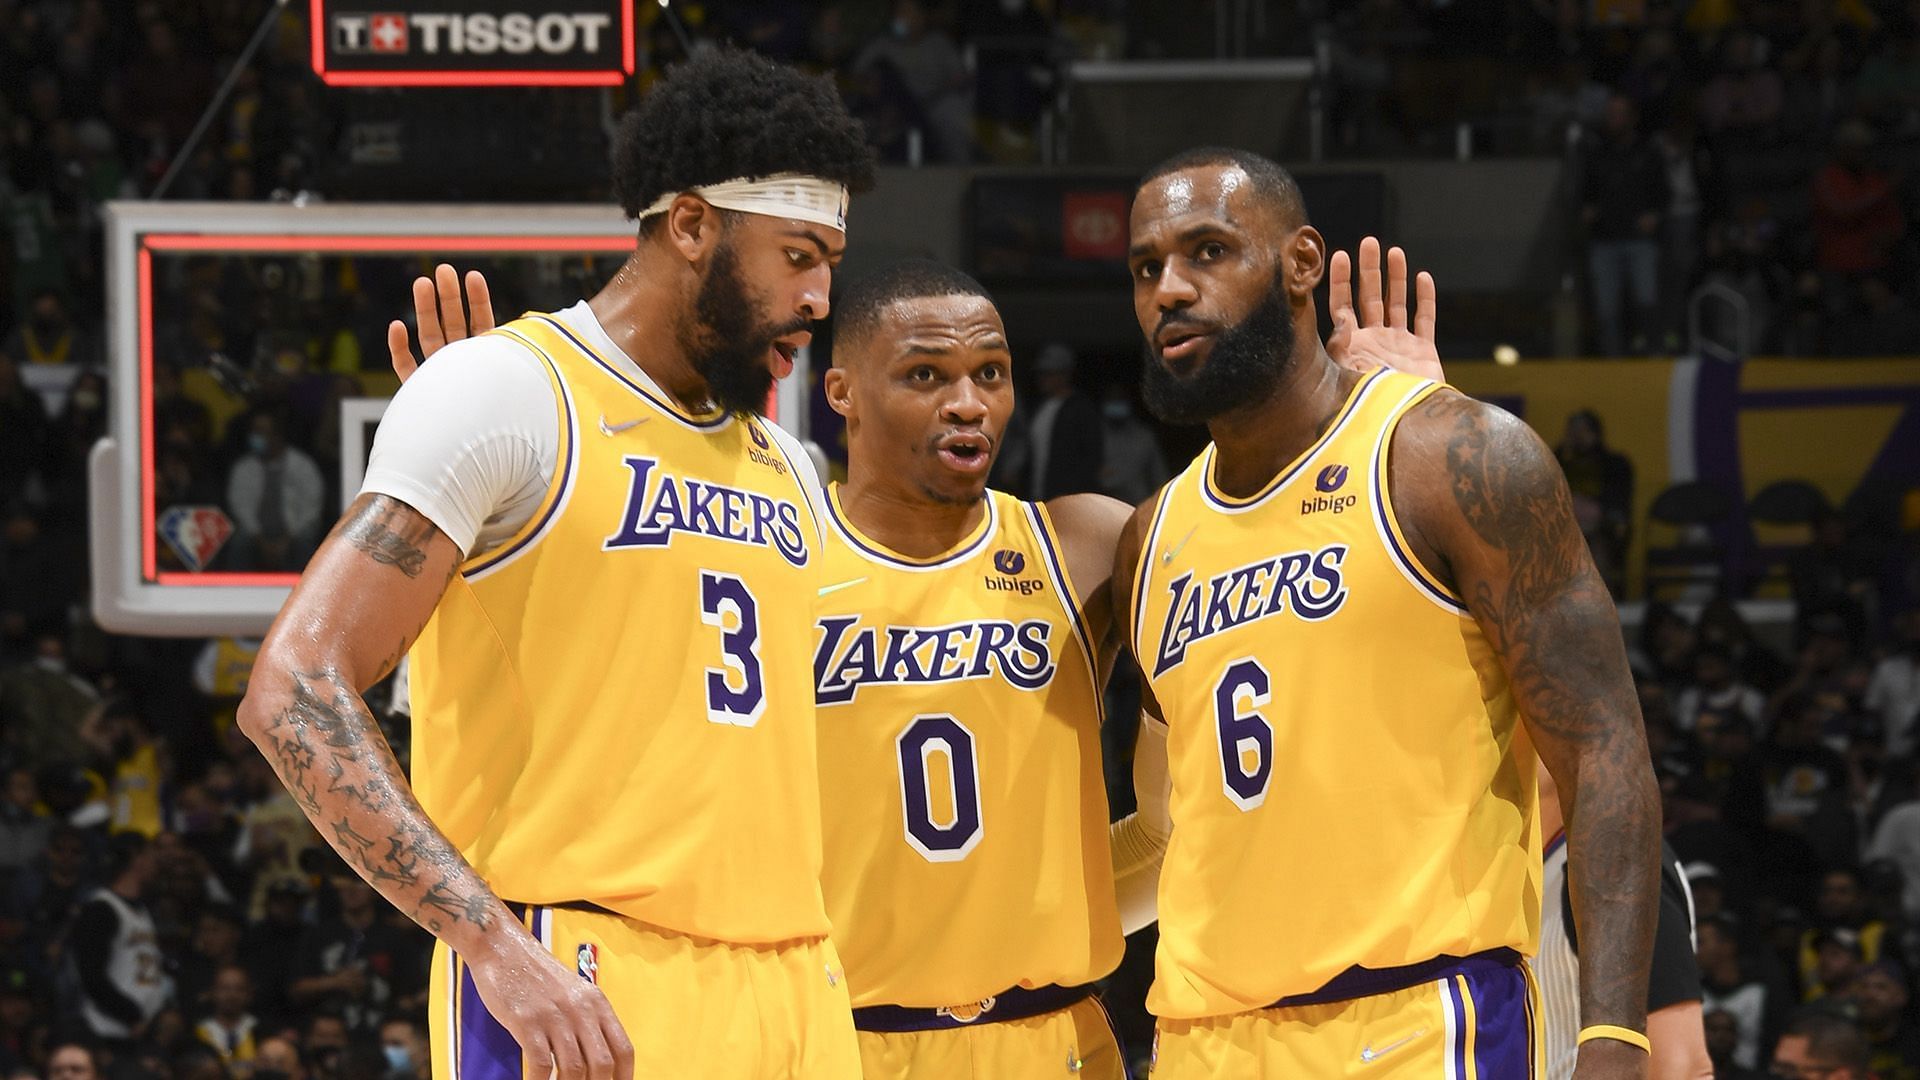 If the Lakers&#039; superstar trio can&#039;t get their acts together as a unit, more disappointment is coming to Hollywood. [Photo: NBA.com]